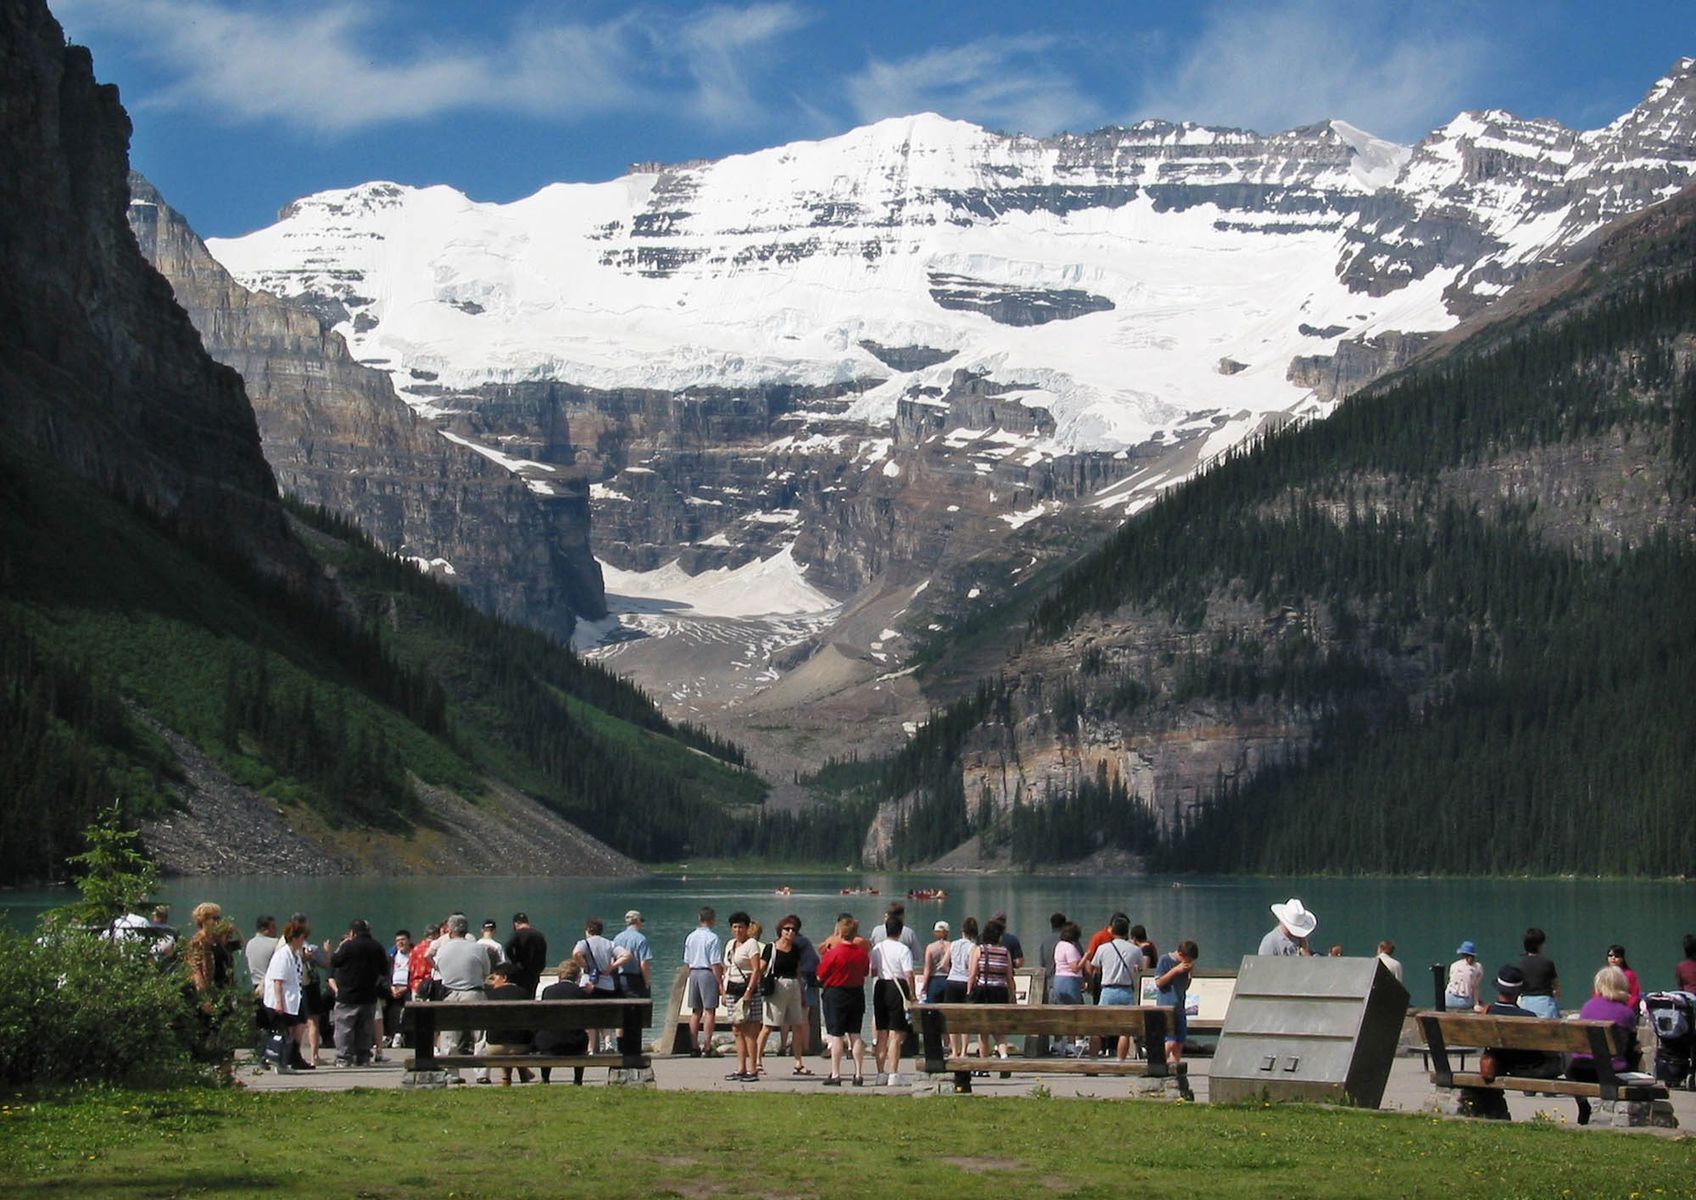 <p>One of the most iconic natural landscapes in the country, this scenic spot is a popular Canadian tourist attraction for good reason. Charming visitors with its turquoise waters, snowcapped peaks, and natural symmetry, <a href="https://www.banfflakelouise.com/experiences/lake-louise">Lake Louise</a> is a fan favourite. Teeming with tourists, especially in the summer months, Banff will cost you a pretty penny in food and accommodations. Seeing over 4 million tourists per year, the area is notorious for its <a href="https://skift.com/2023/01/19/canadas-crowded-banff-confronts-its-overtourism-problem/">overtourism problem</a> and car traffic. Even though the neighbouring <a href="https://www.banfflakelouise.com/experiences/moraine-lake">Moraine Lake</a> has also been plagued with increased foot and car traffic over the years, if you time it right it’s still possible to enjoy a quiet moment paddling by the sprawling pines and rocky landscape.</p>